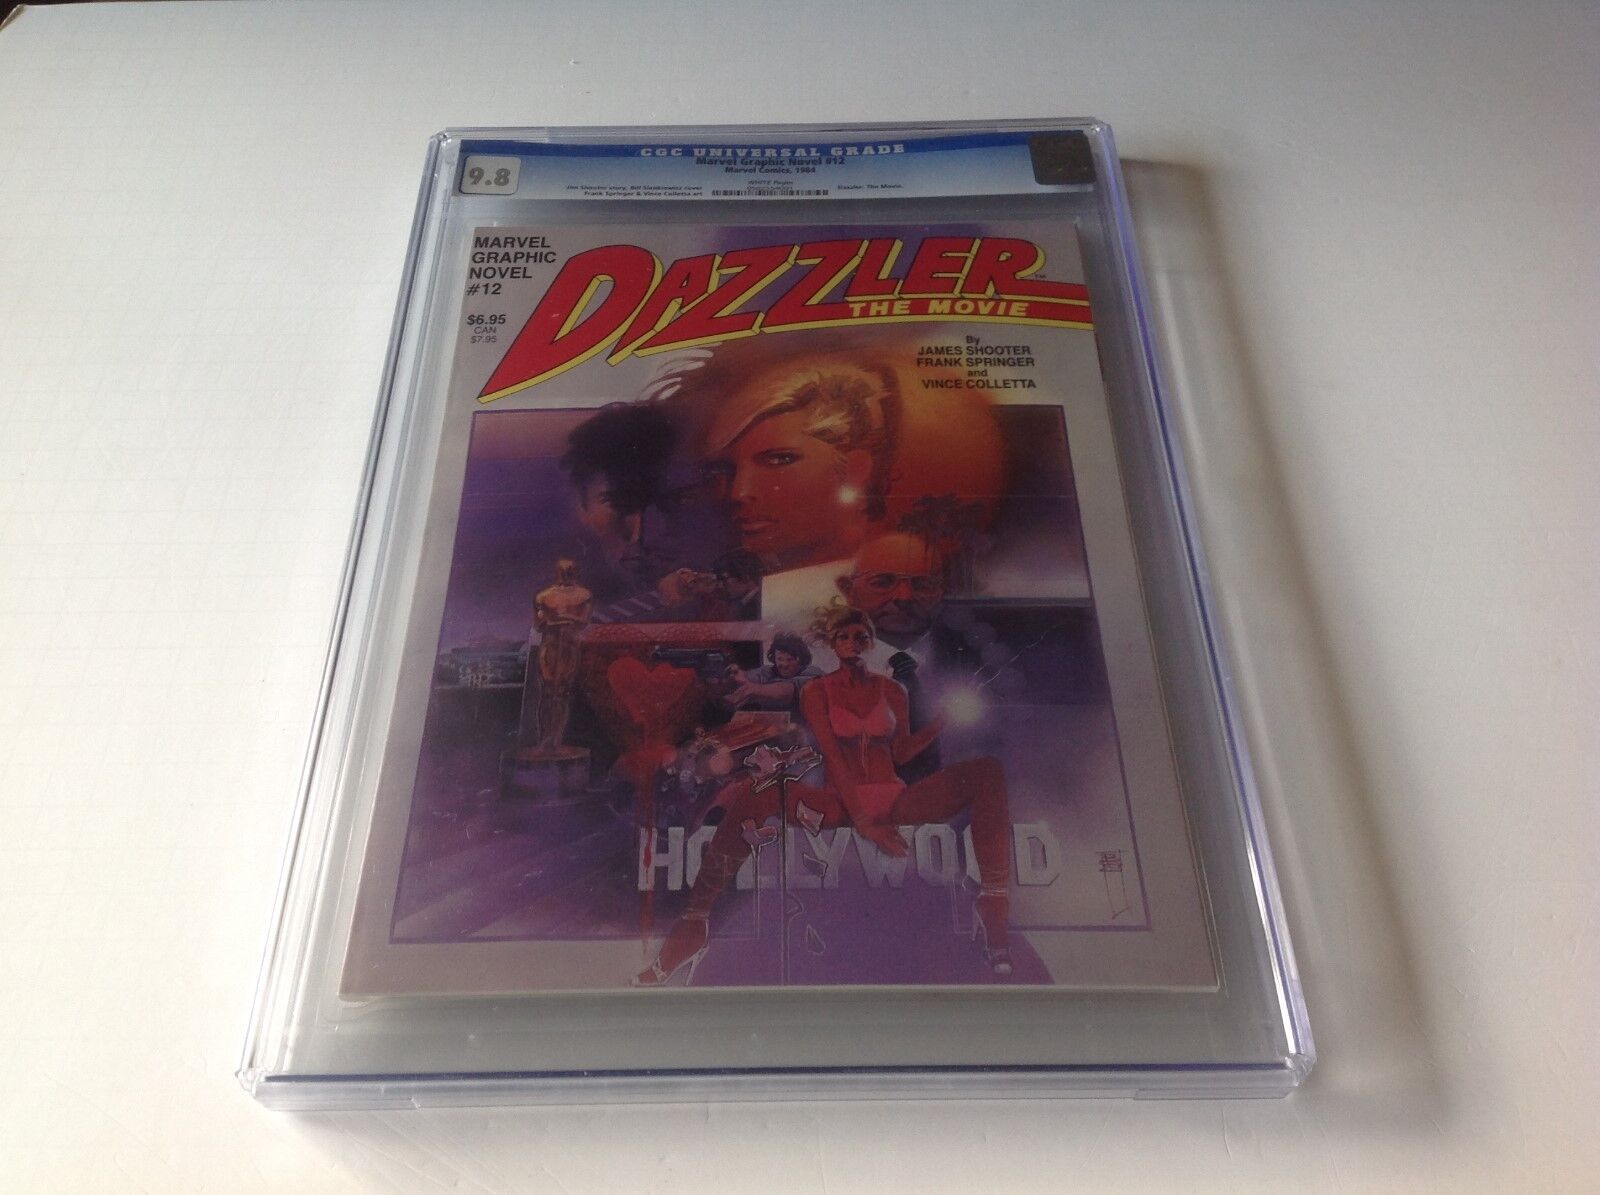 MARVEL GRAPHIC NOVEL 12 CGC 9.8 WHITE PAGES DAZZLER THE MOVIE MARVEL COMIC LOT 1